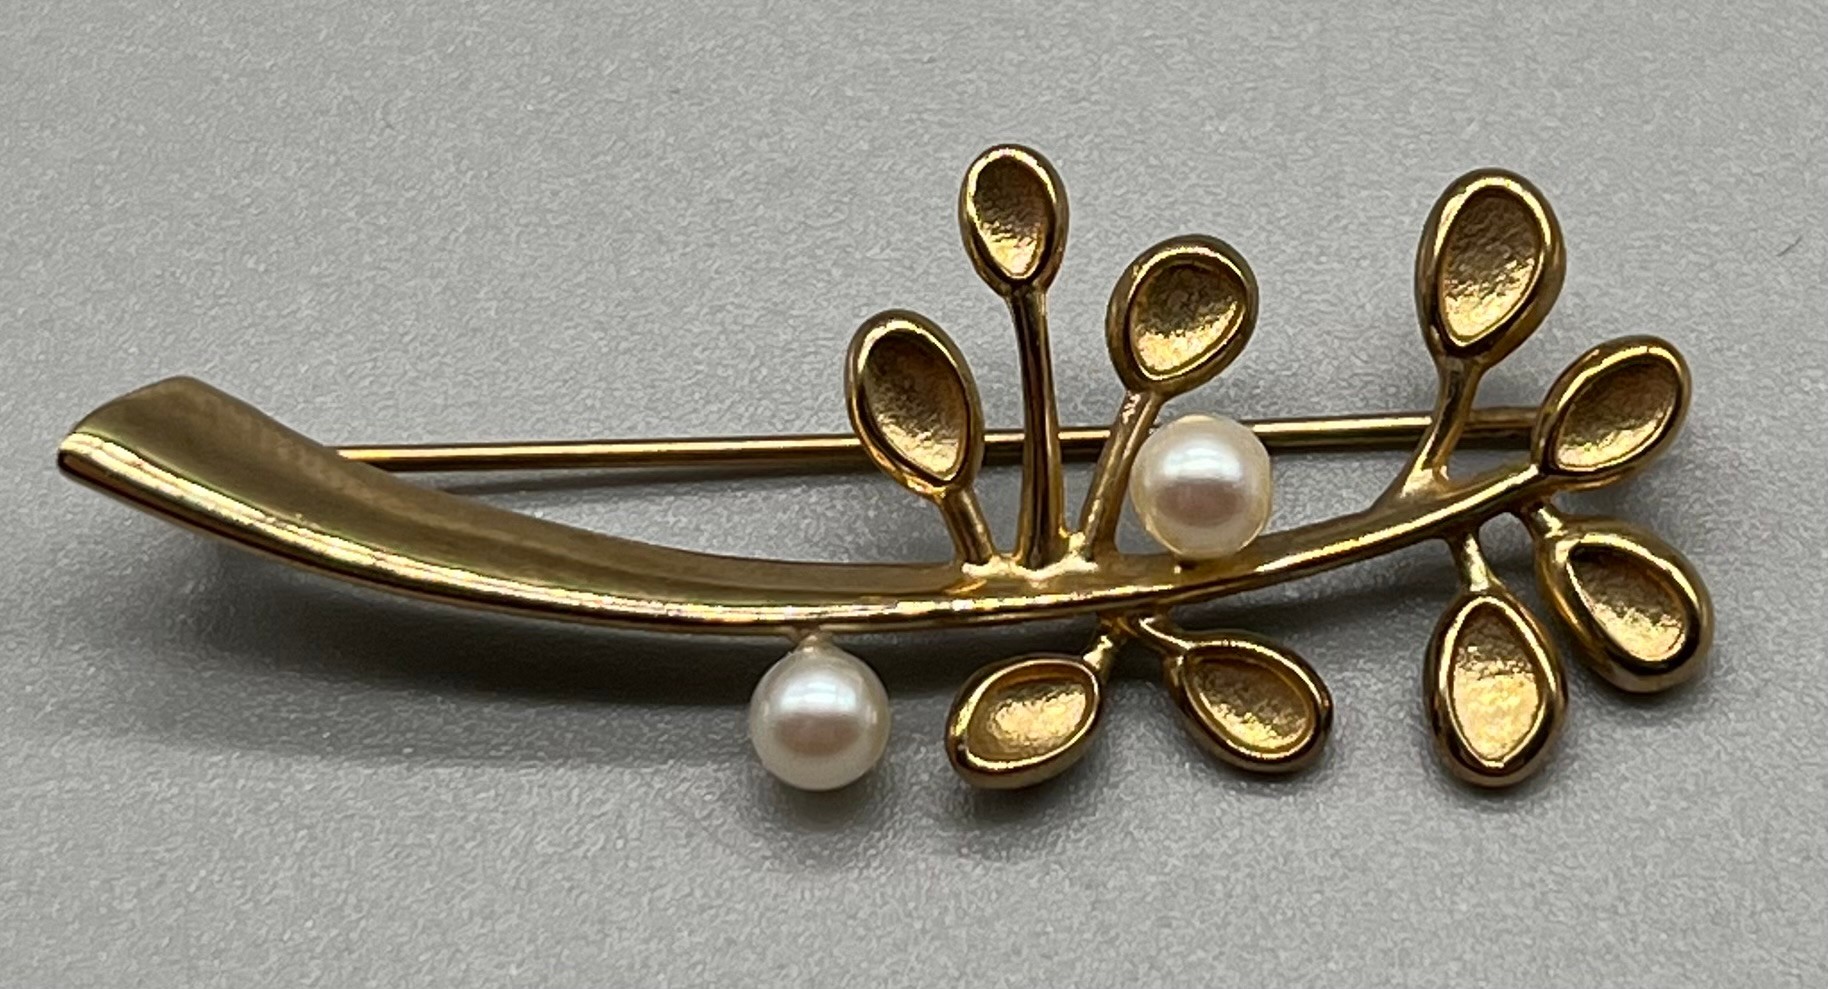 Edinburgh 9ct yellow gold tree shaped brooch fitted with two pearls. [5.86grams] [5cm in length]